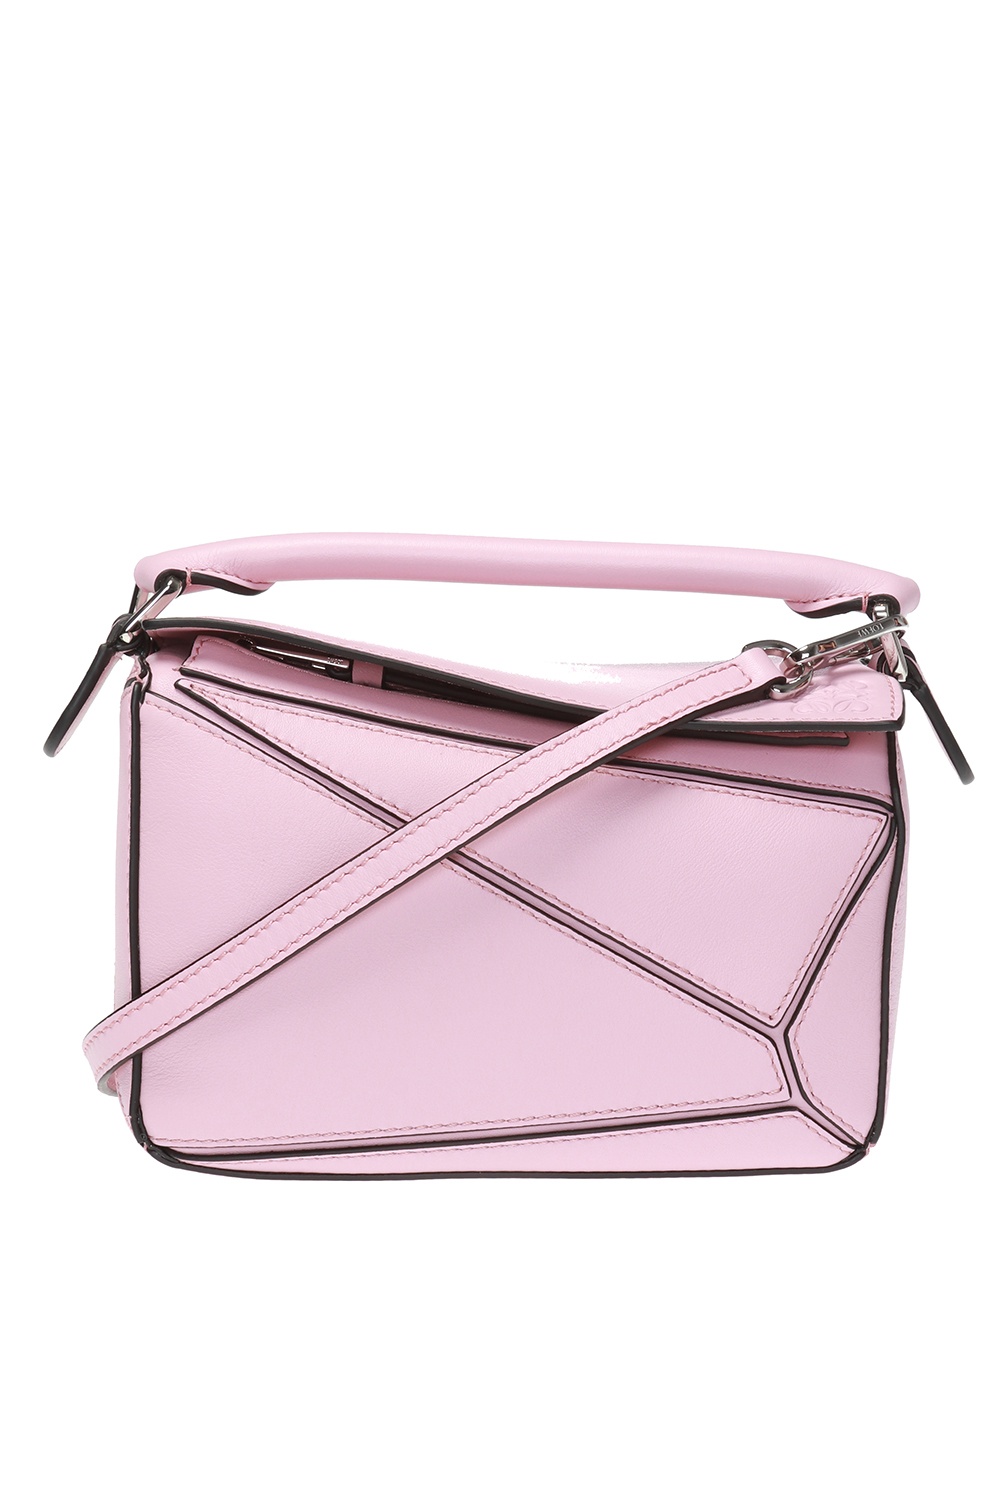 Puzzle Small Leather Shoulder Bag in Pink - Loewe